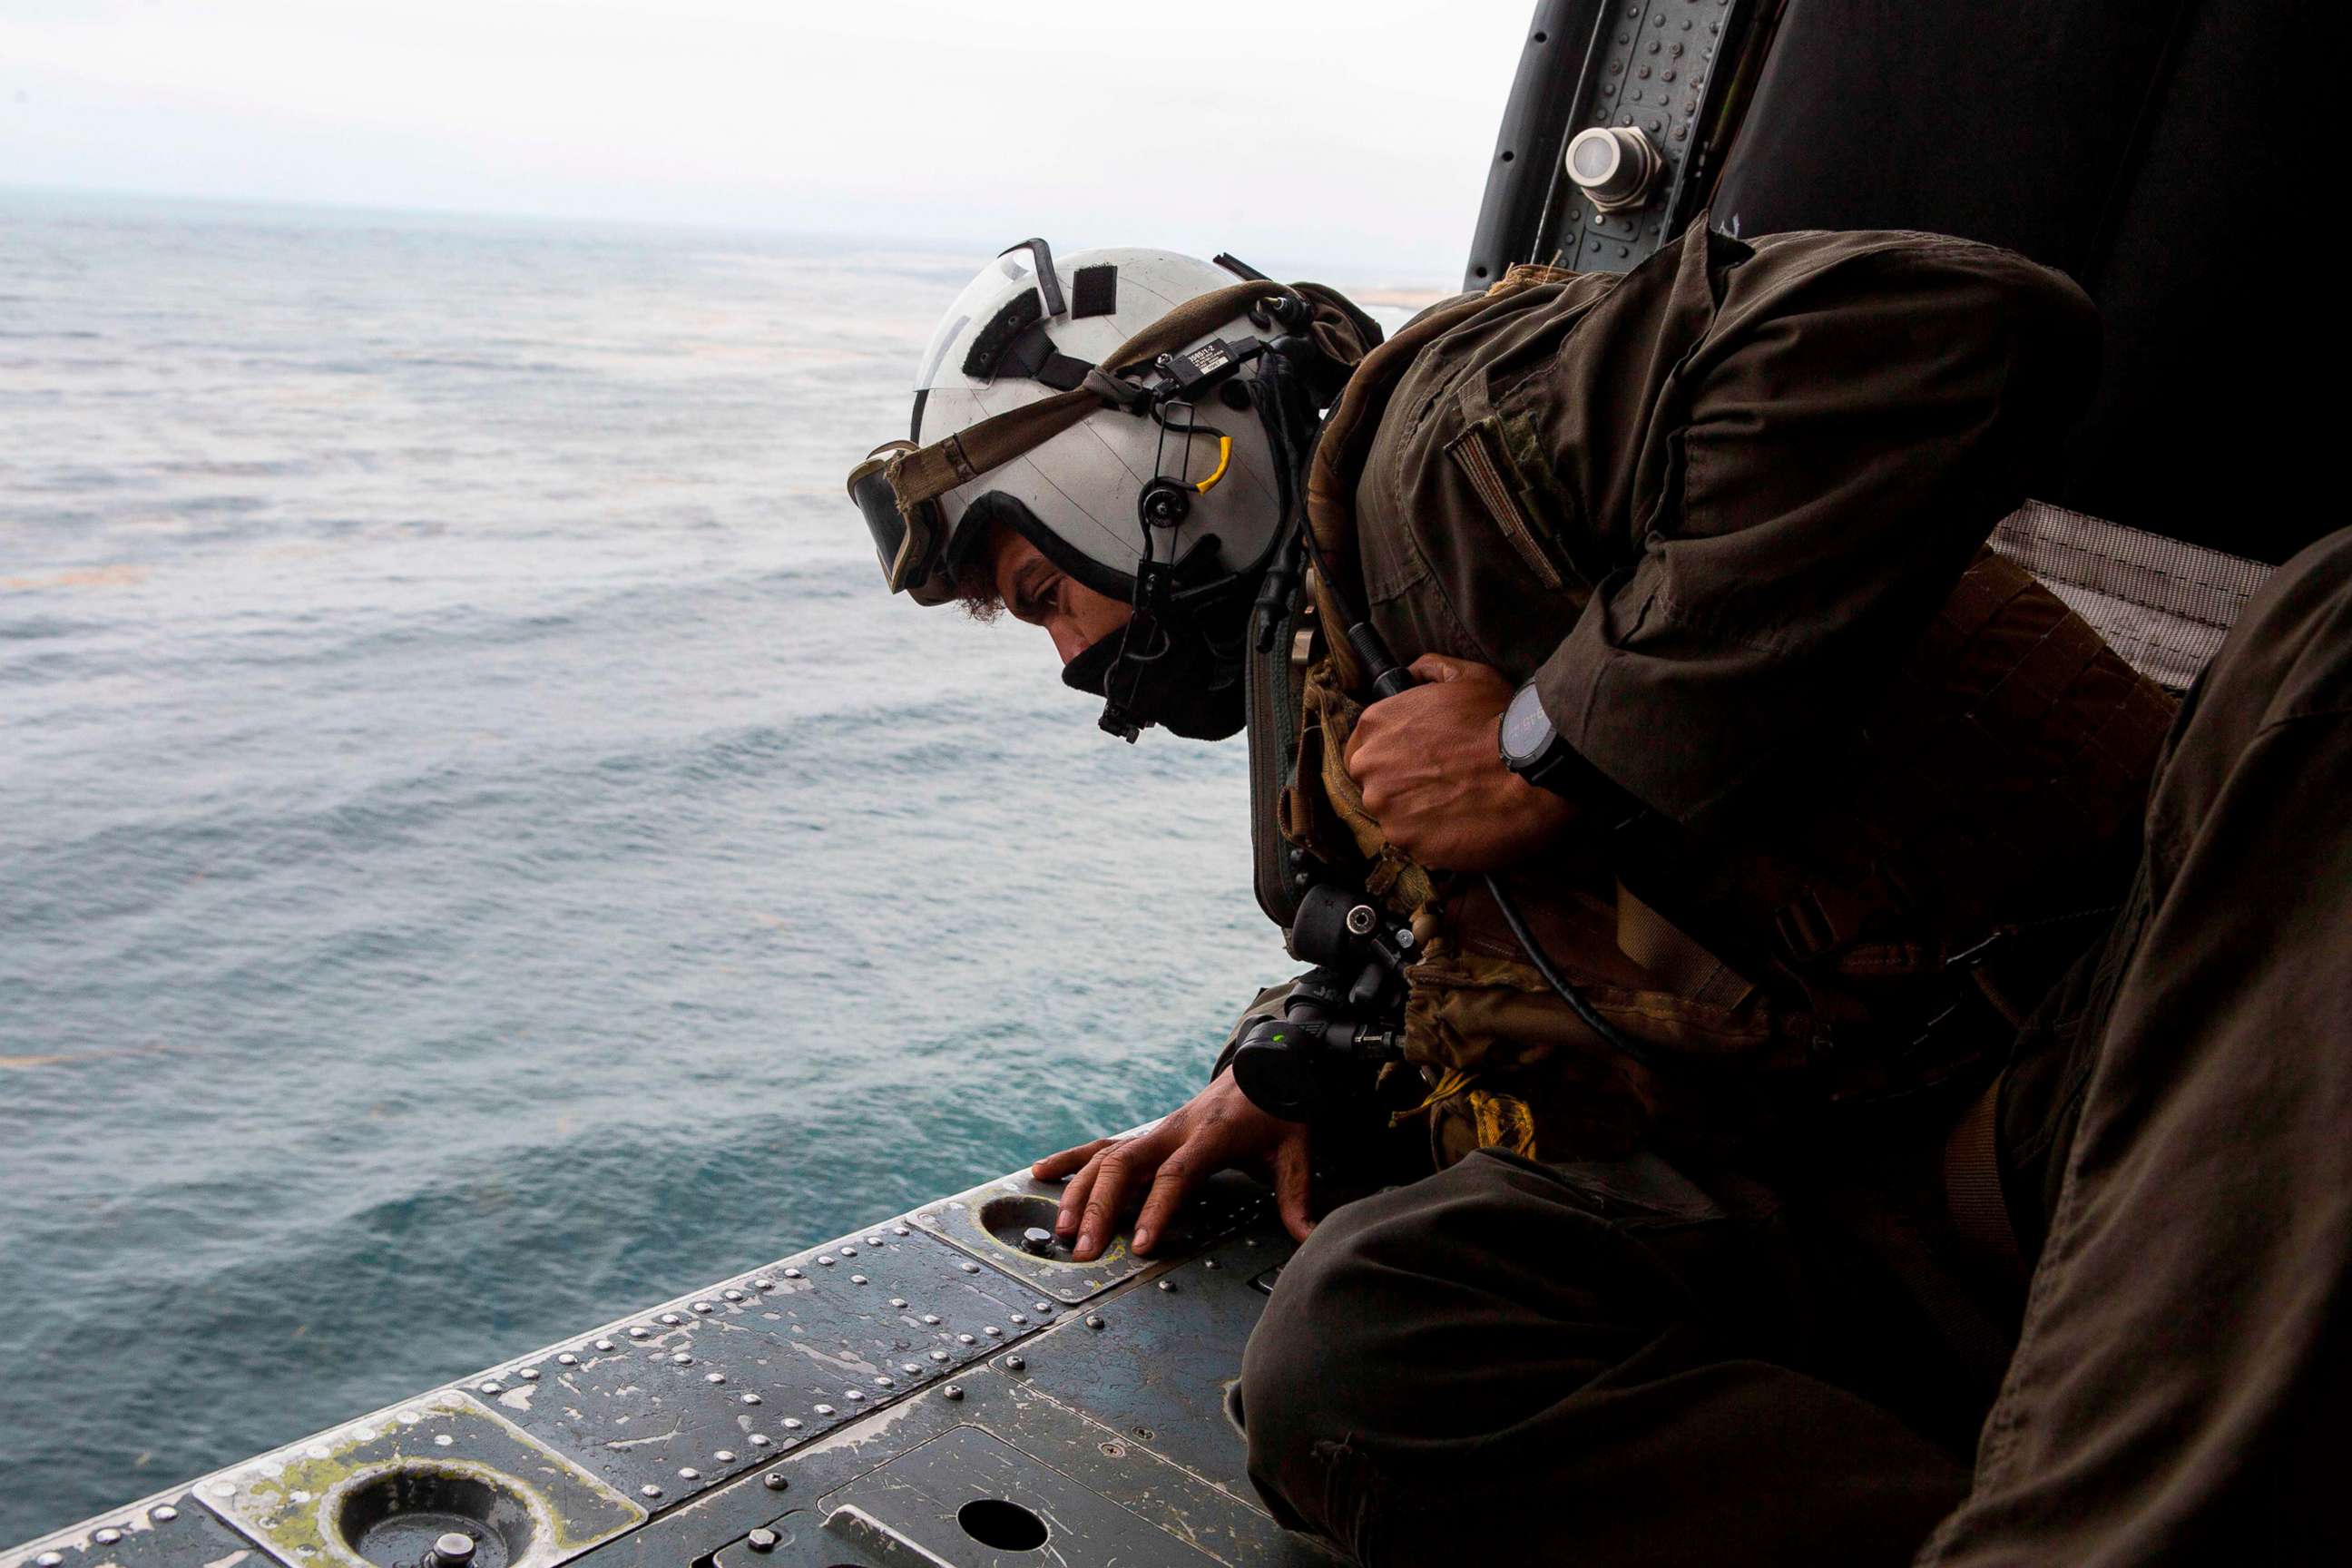 PHOTO: This US Marine Corps photo obtained Aug. 2, 2020 shows Naval Air Crewman  participating in search and rescue relief operations following an AAV-P7/A1 assault amphibious vehicle mishap off the coast of Southern California.